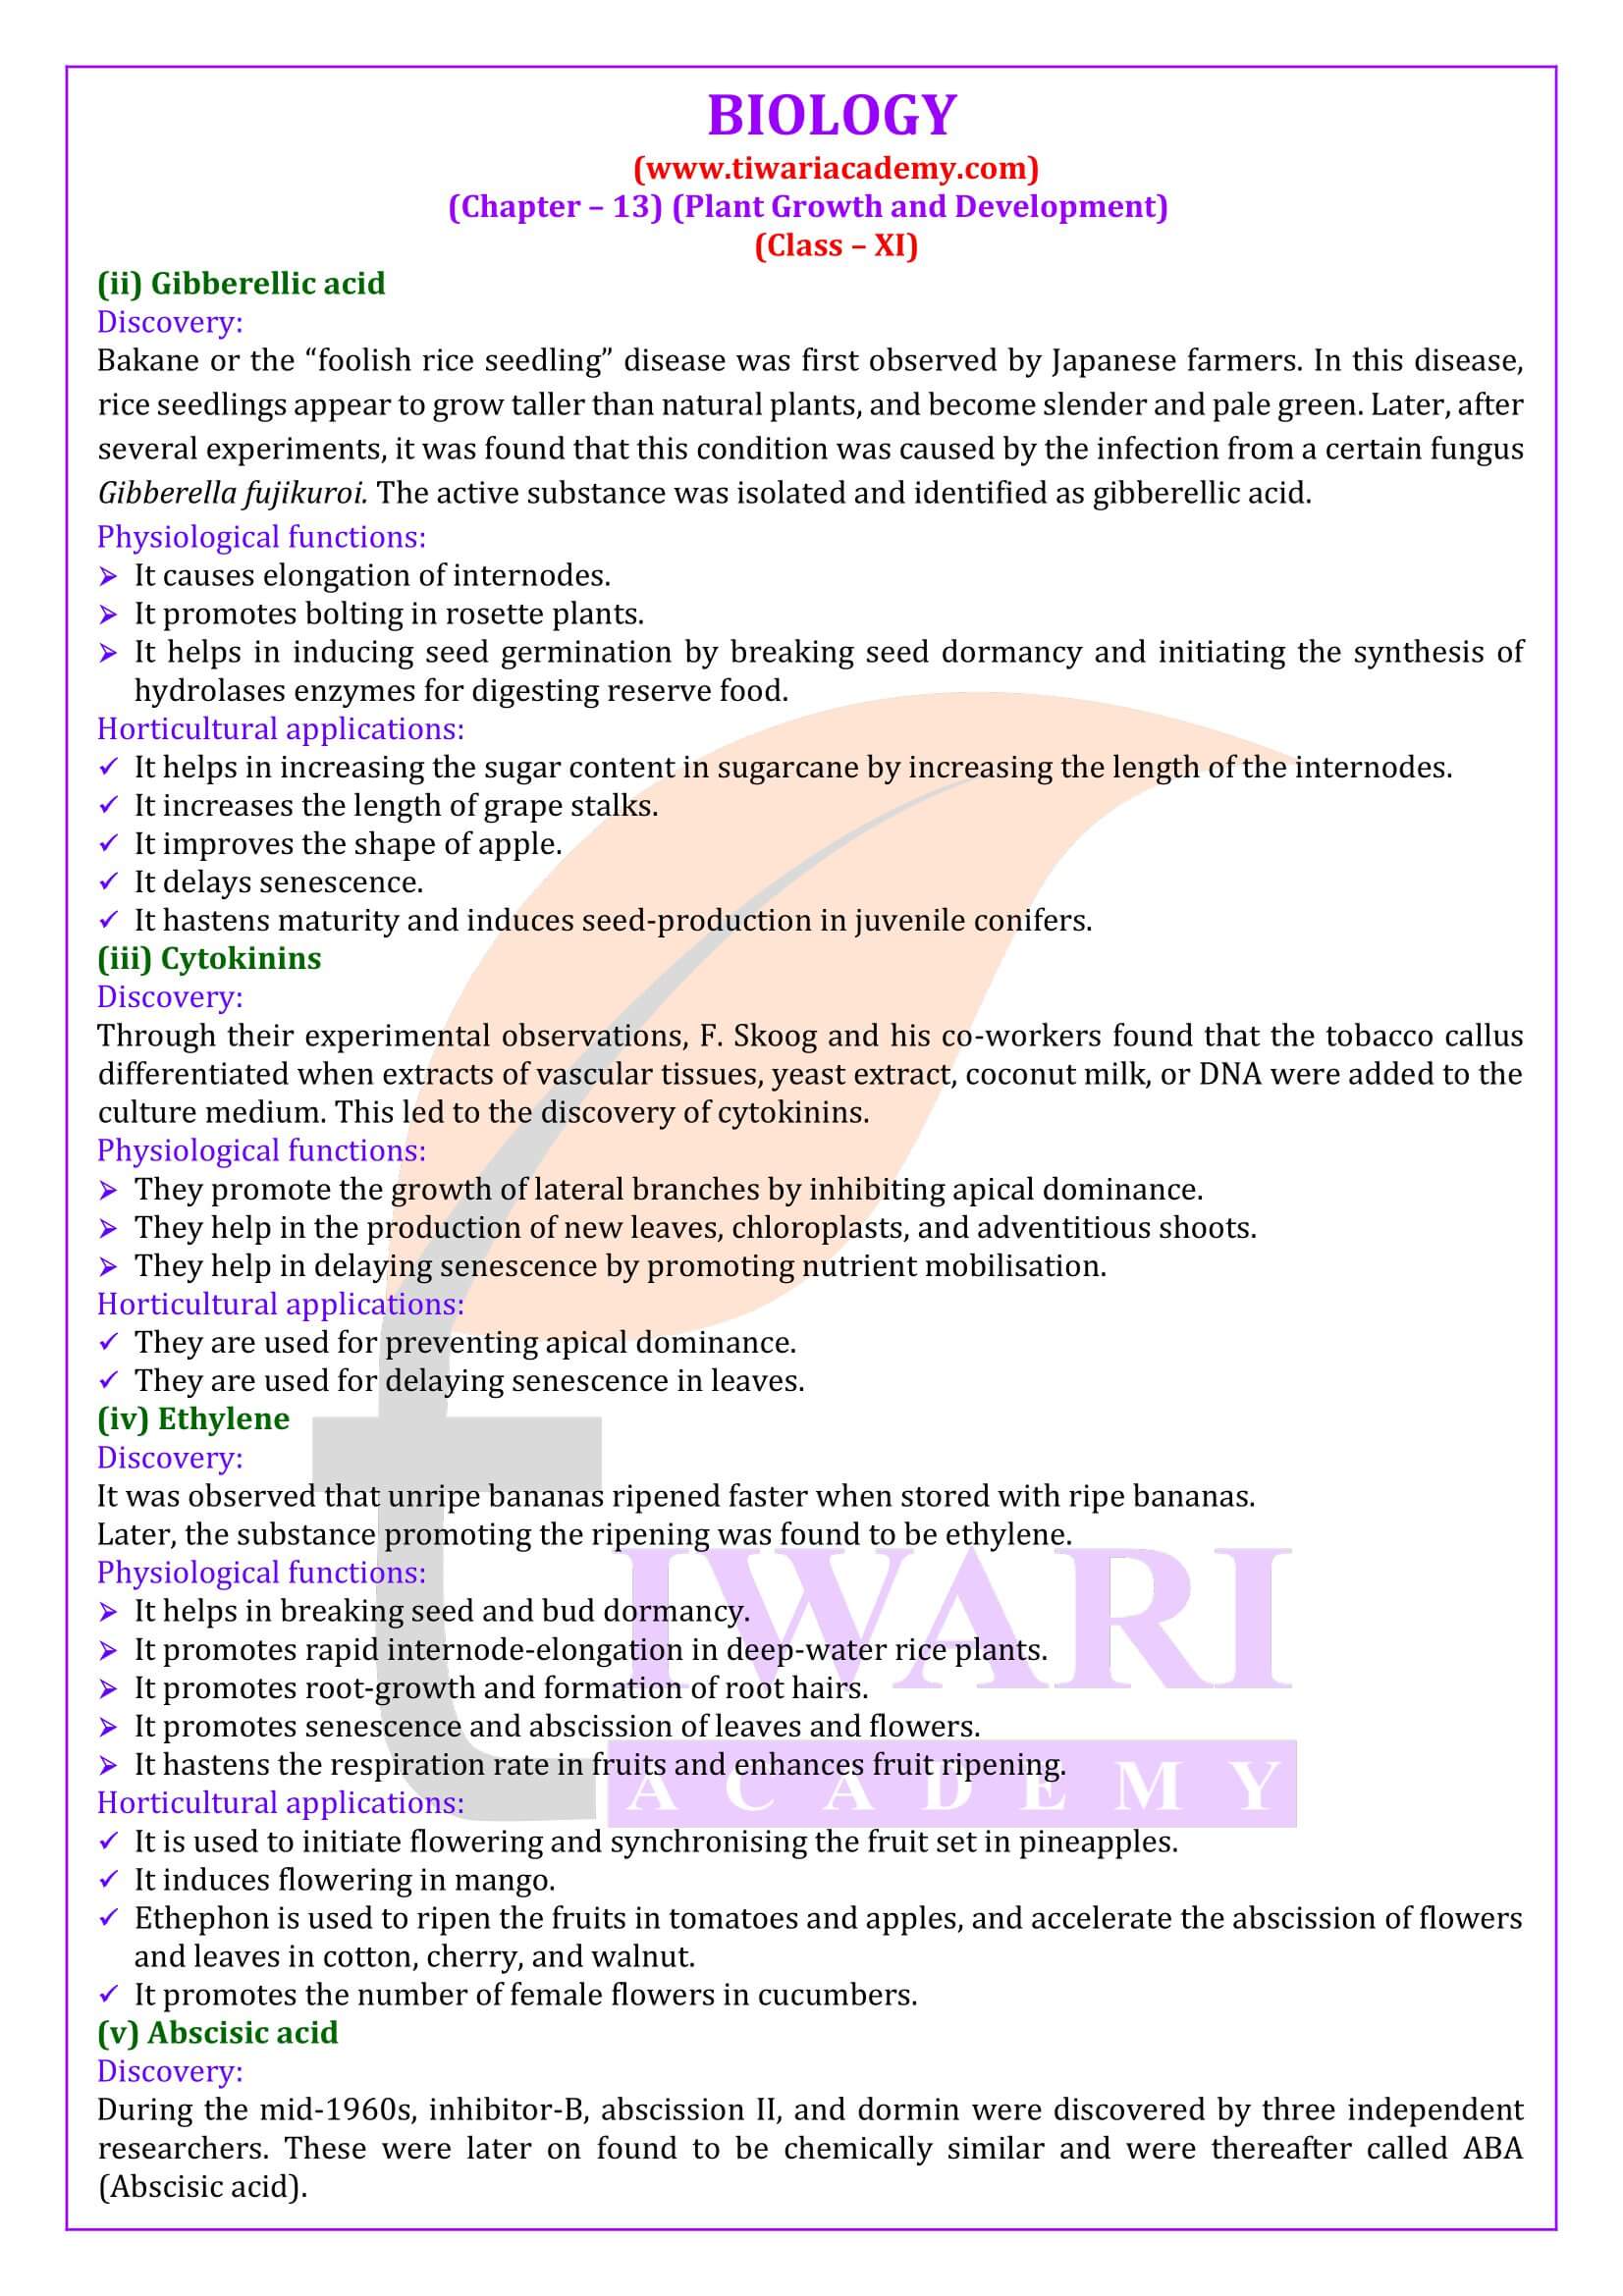 NCERT Solutions for Class 11 Biology Chapter 13 in English Medium